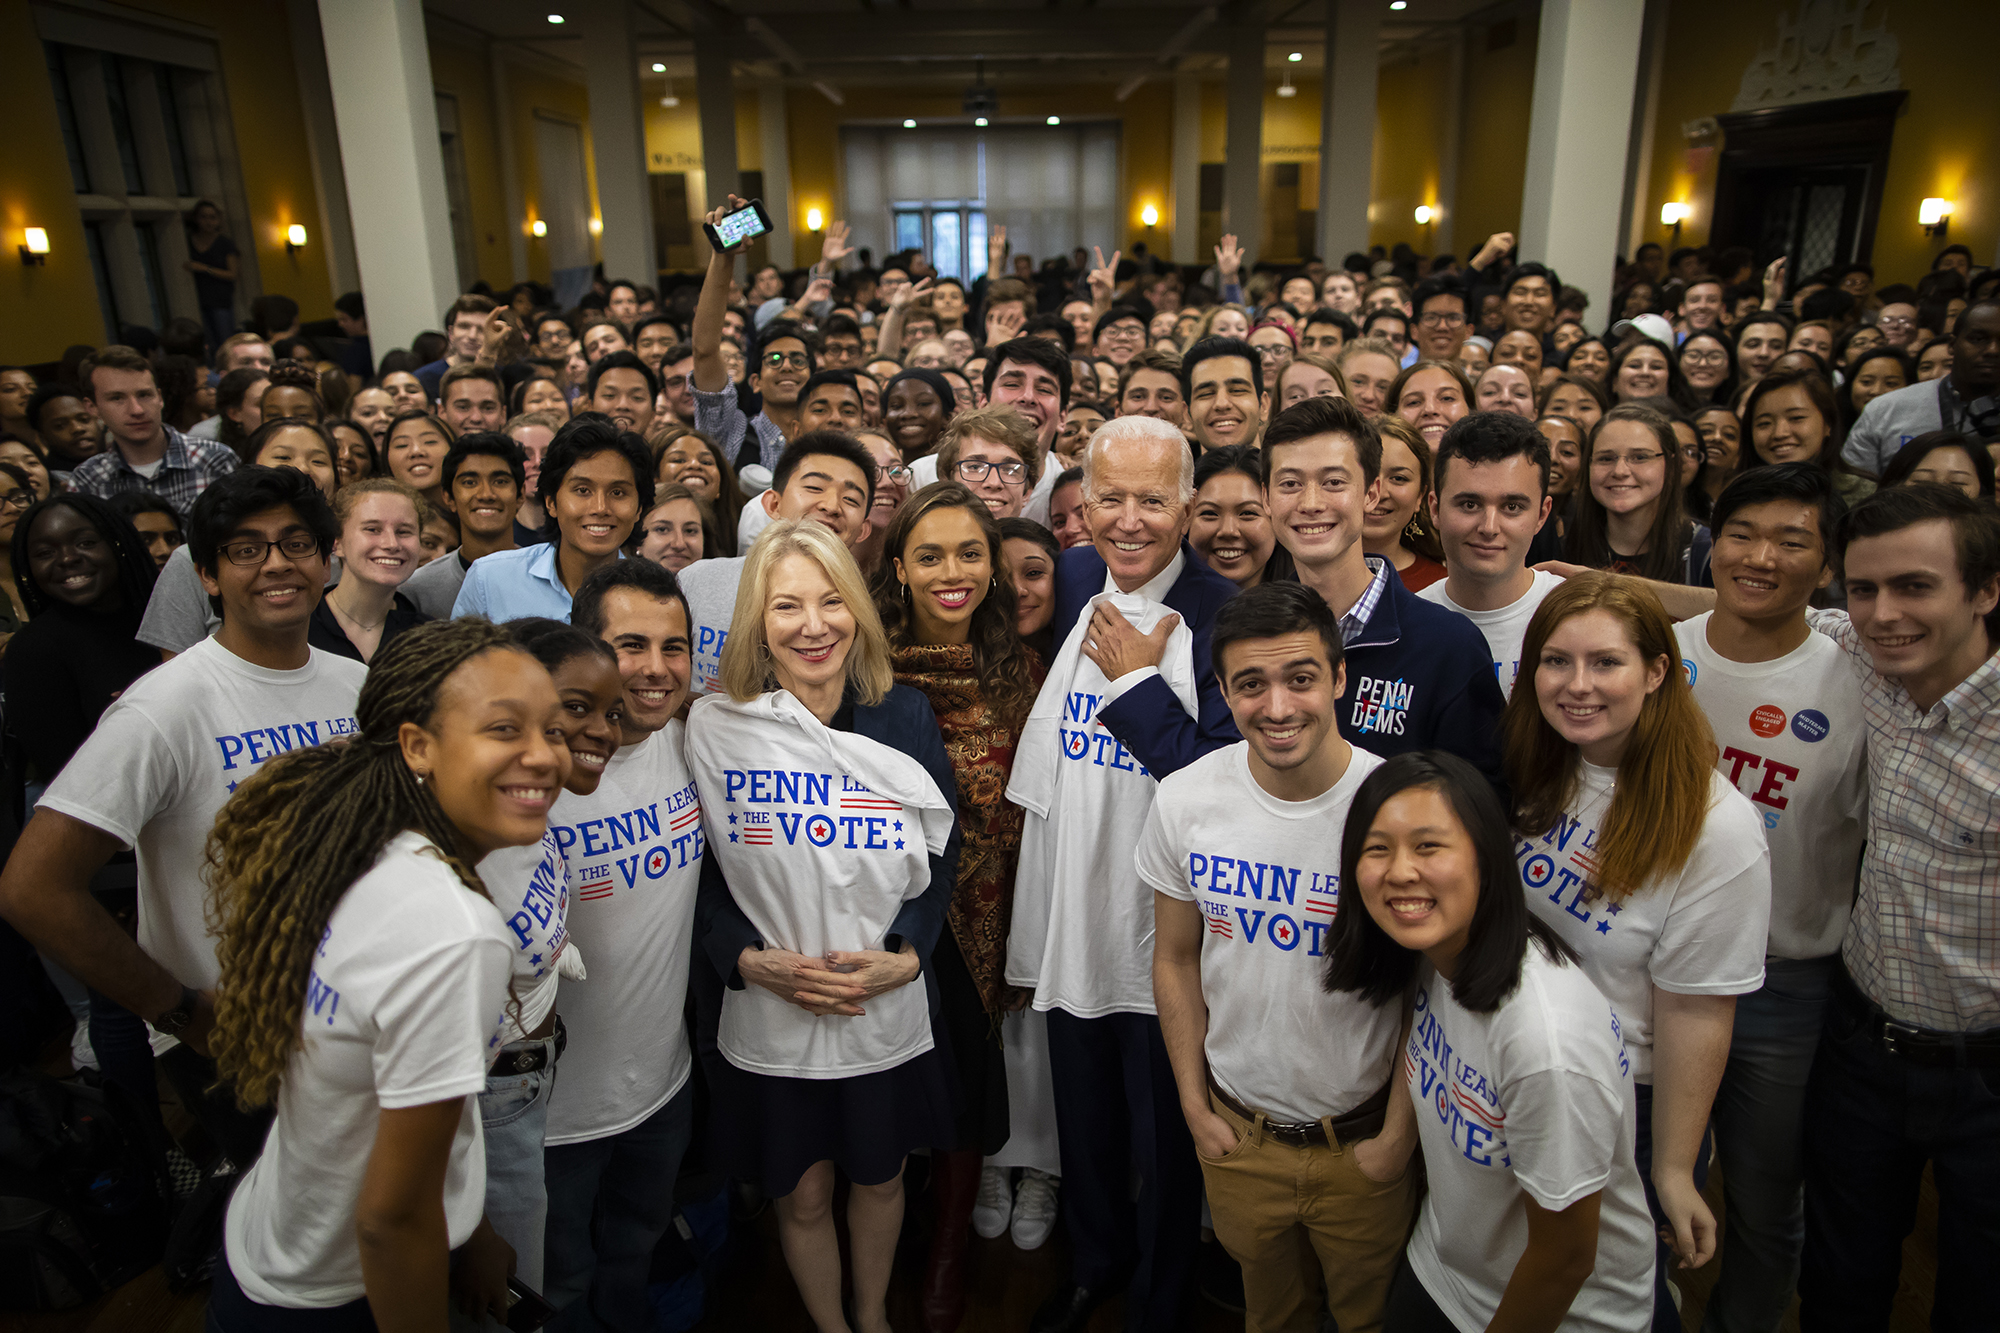 Biden smiles for a photo with a big group of students in Penn Leads the Vote